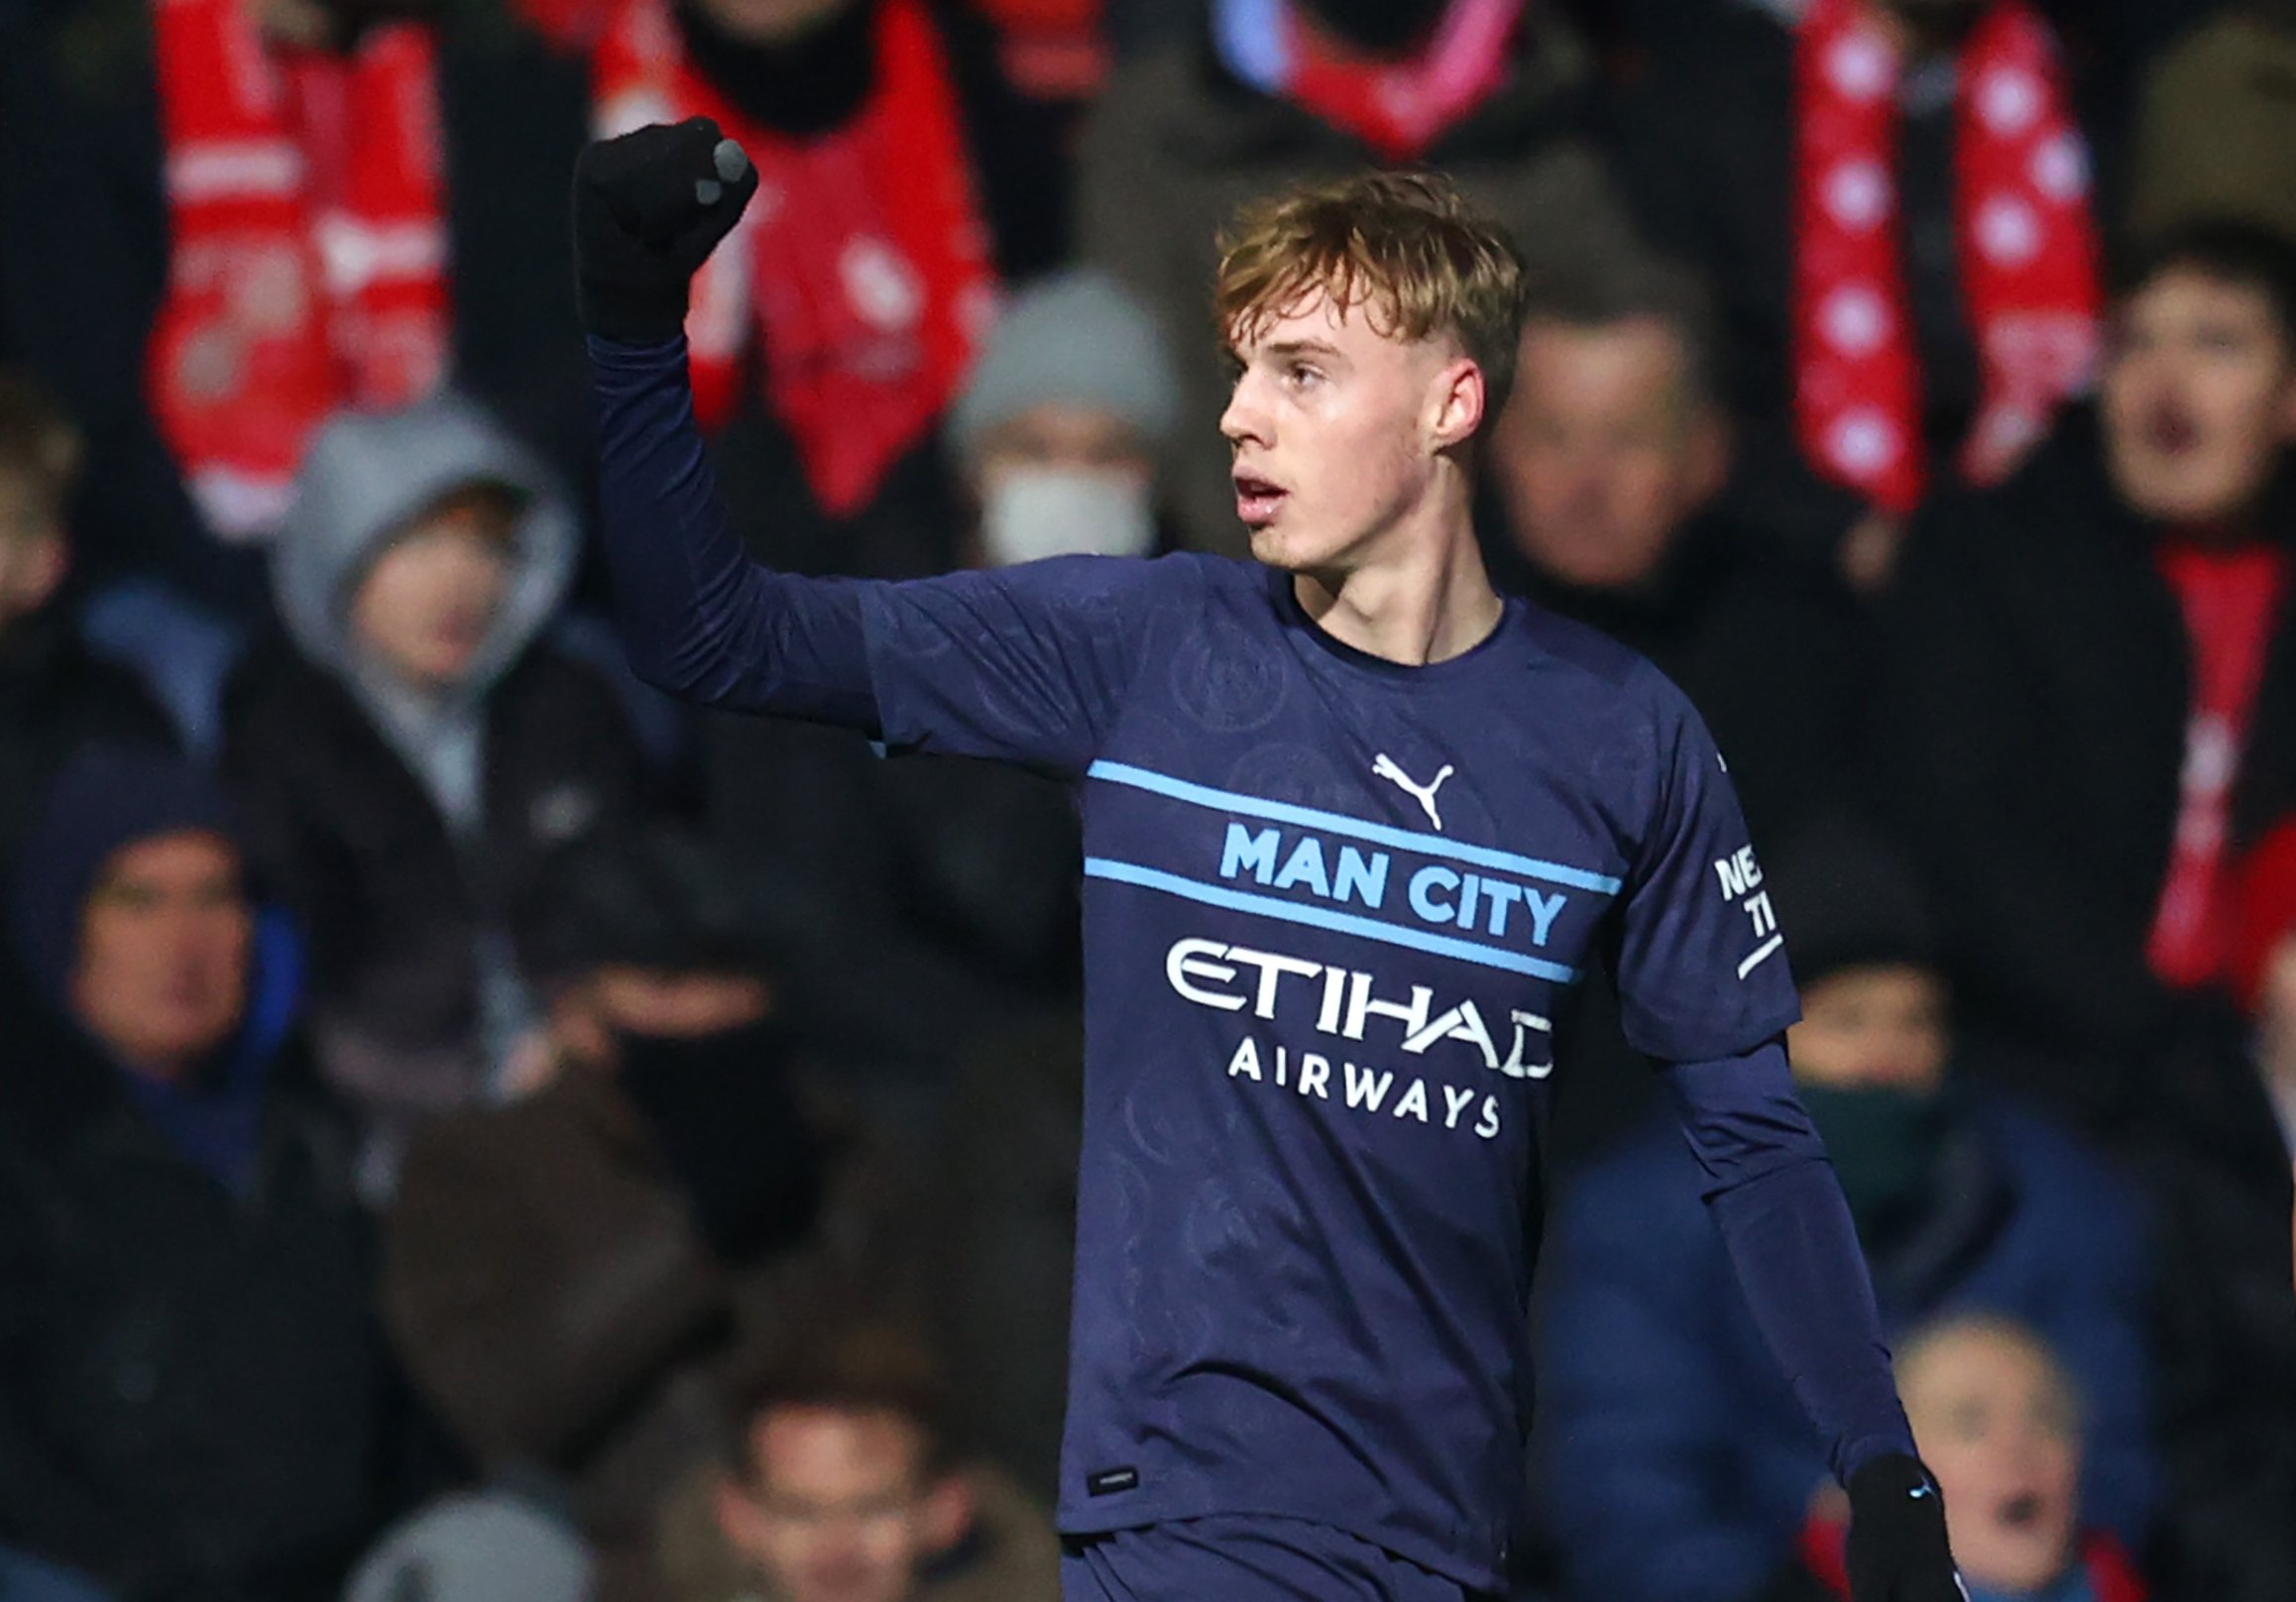 Swindon 1-4 Manchester City: Cityzens ease past Swindon Town in Emirates FA Cup 3rd Round in Pep Guardiola’s absence